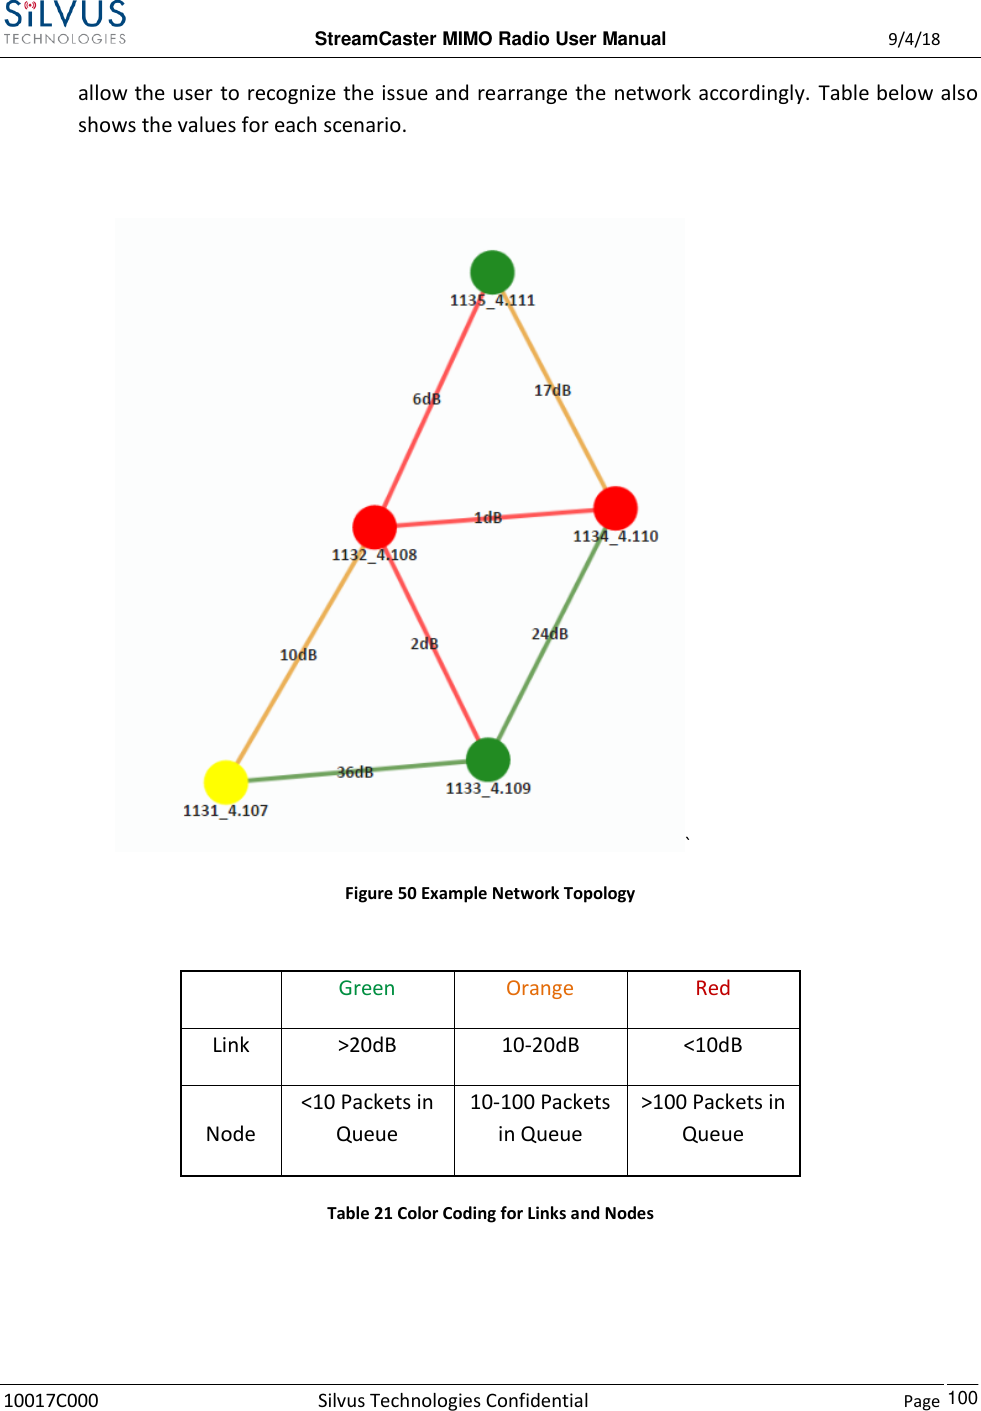  StreamCaster MIMO Radio User Manual  9/4/18 10017C000 Silvus Technologies Confidential    Page    100 allow the user to recognize the issue and rearrange the network accordingly. Table below also shows the values for each scenario.  `       Figure 50 Example Network Topology   Green Orange Red Link &gt;20dB 10-20dB &lt;10dB Node &lt;10 Packets in Queue 10-100 Packets in Queue &gt;100 Packets in Queue Table 21 Color Coding for Links and Nodes   